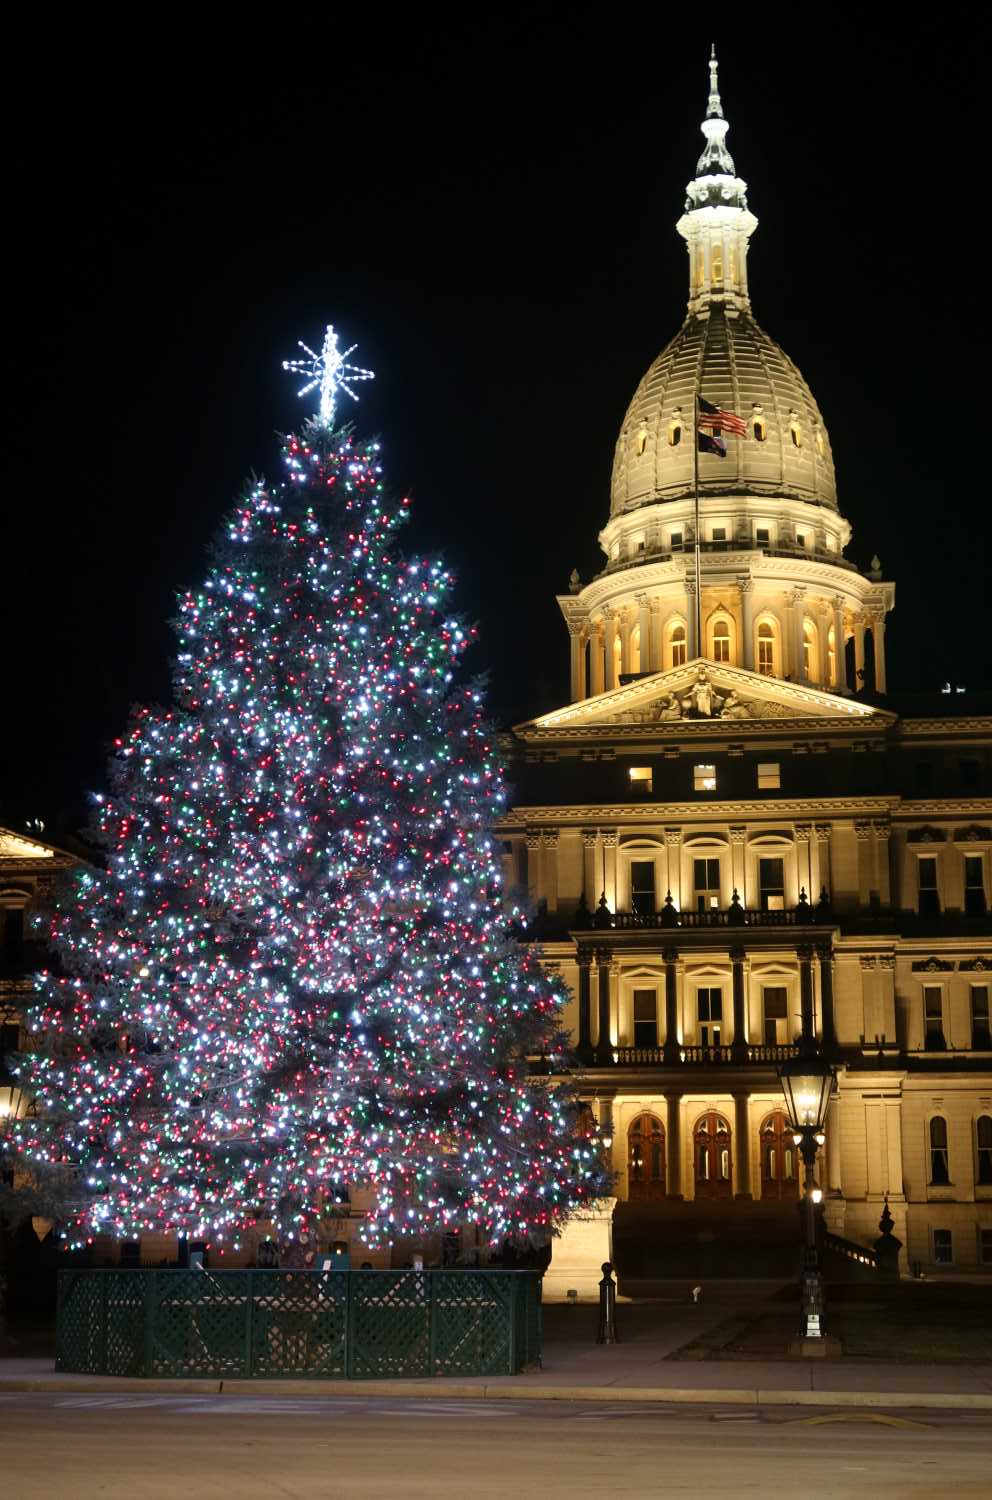 Michigan's State Capitol Building with the Lighted Christmas Tree - the fun fact about Lansing, Michigan is it is the only state capital that isn't also the county seat